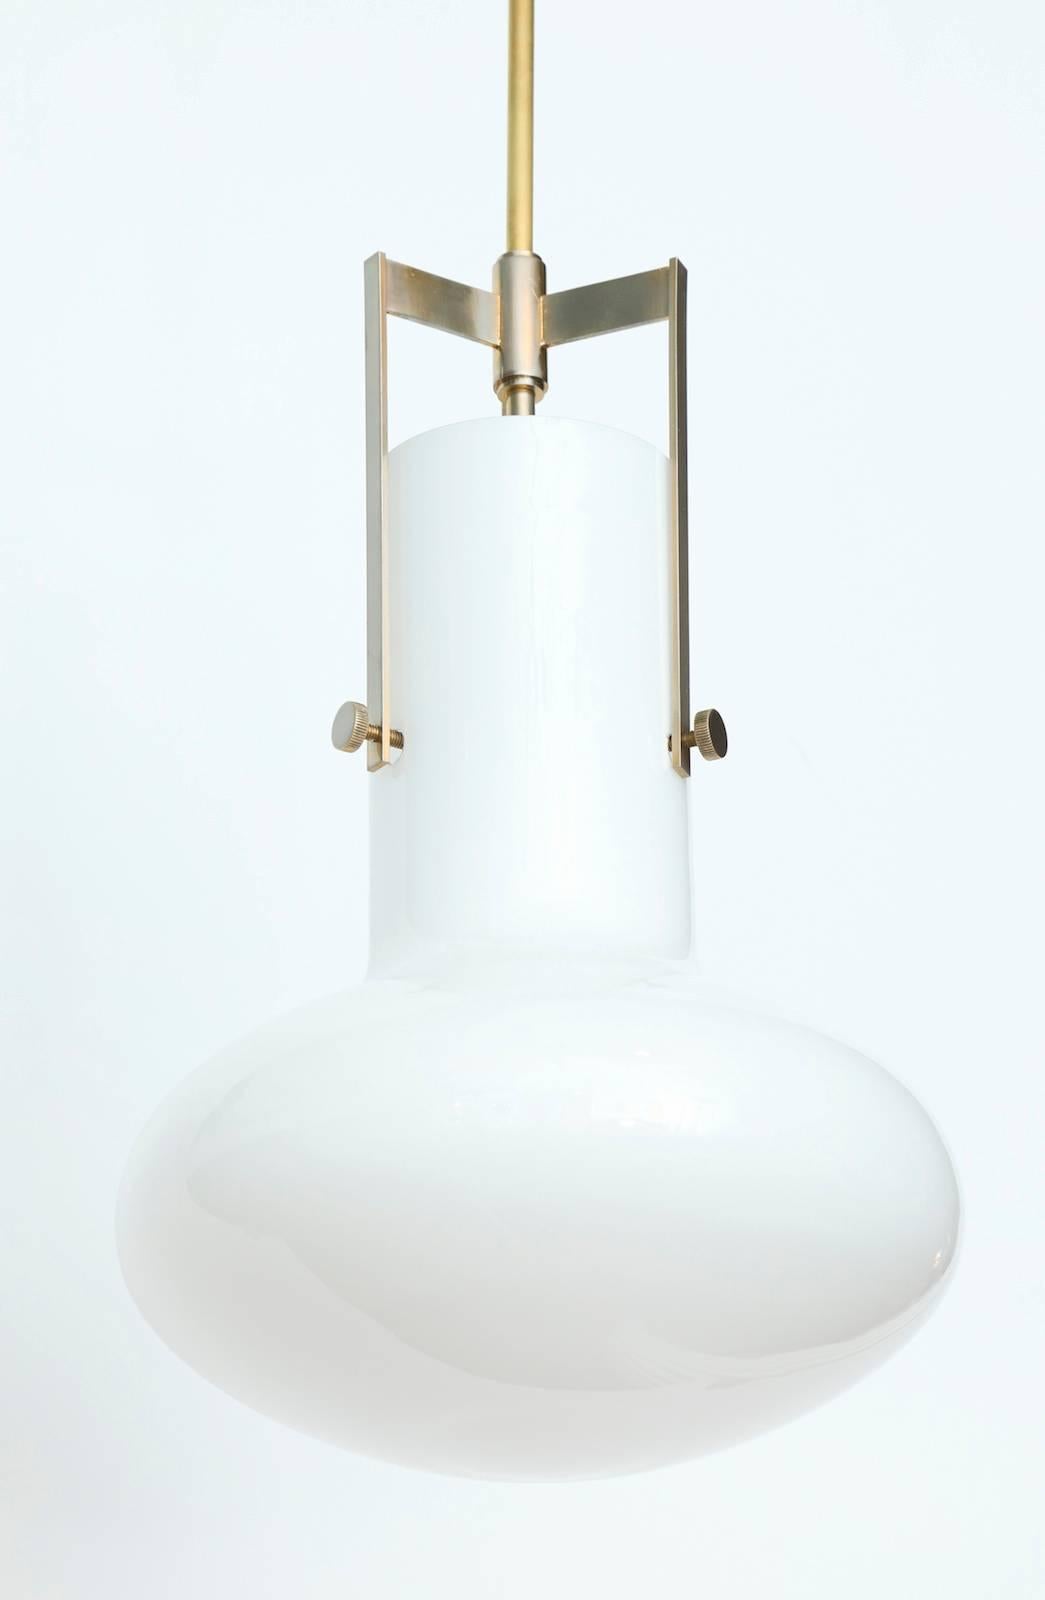 Elegant pendant light by Venini.
Produced by Venini in Murano. Mushroom-shaped, white glass shade and brass stem and mount. This light has one Edison sized socket and has been rewired for use in the USA.